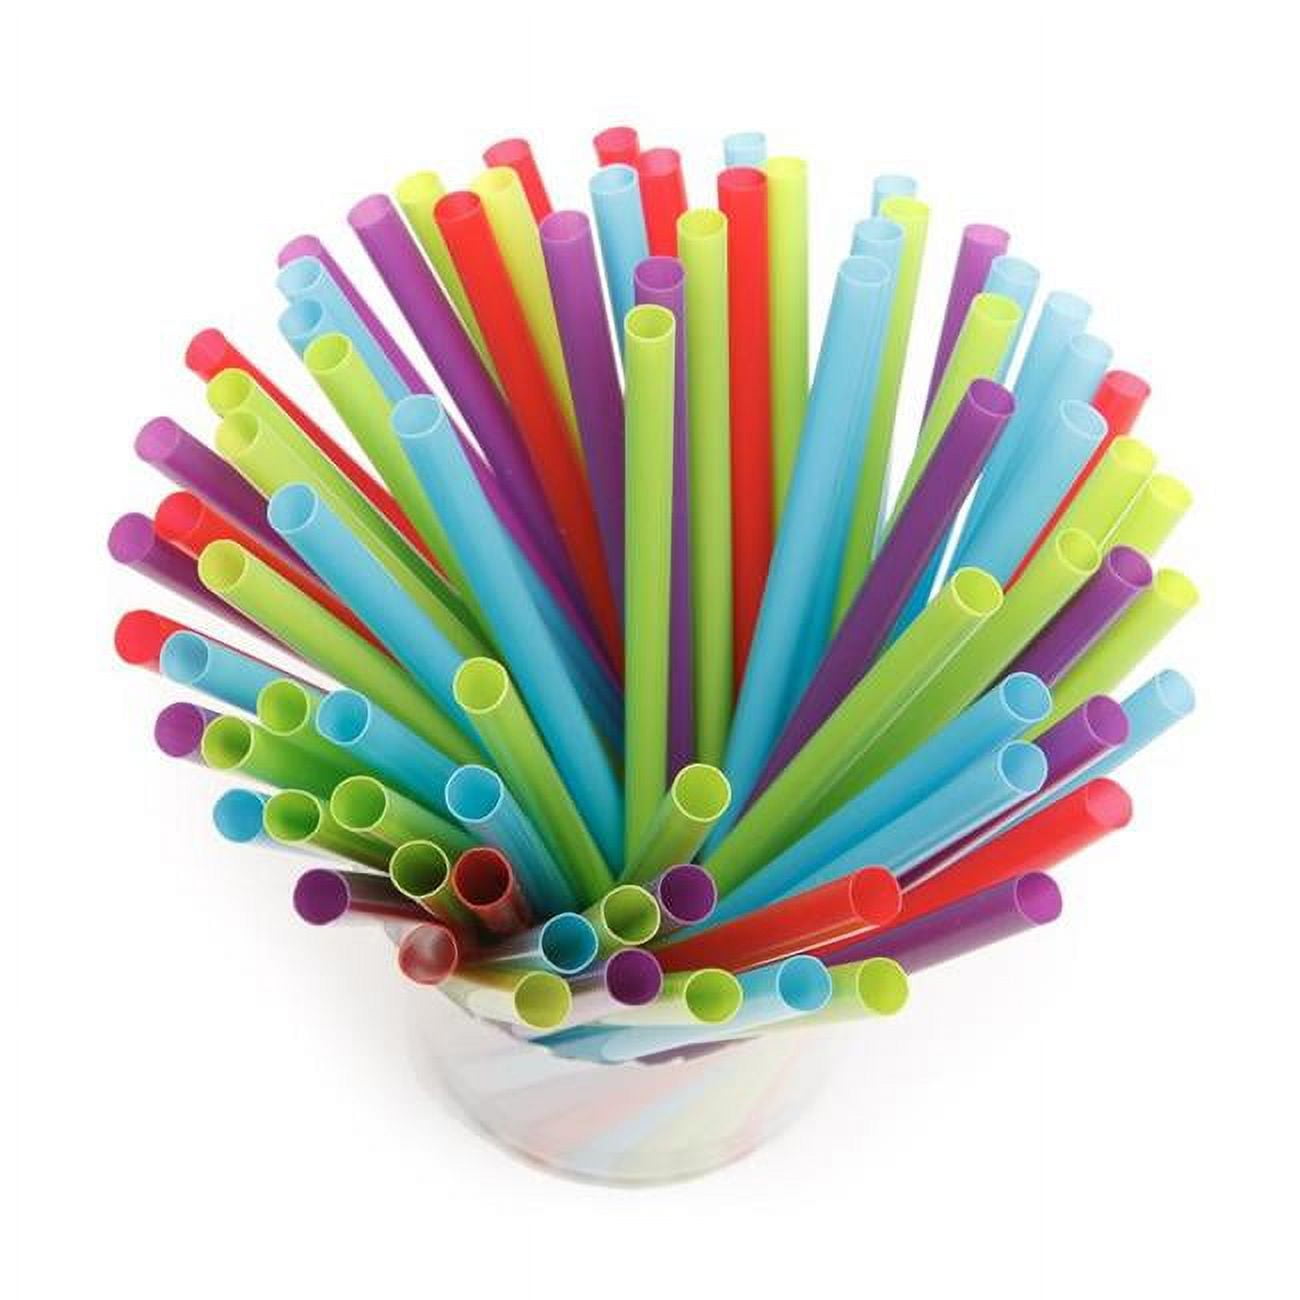 Cane Straws - Extra Long (Pack of 250)